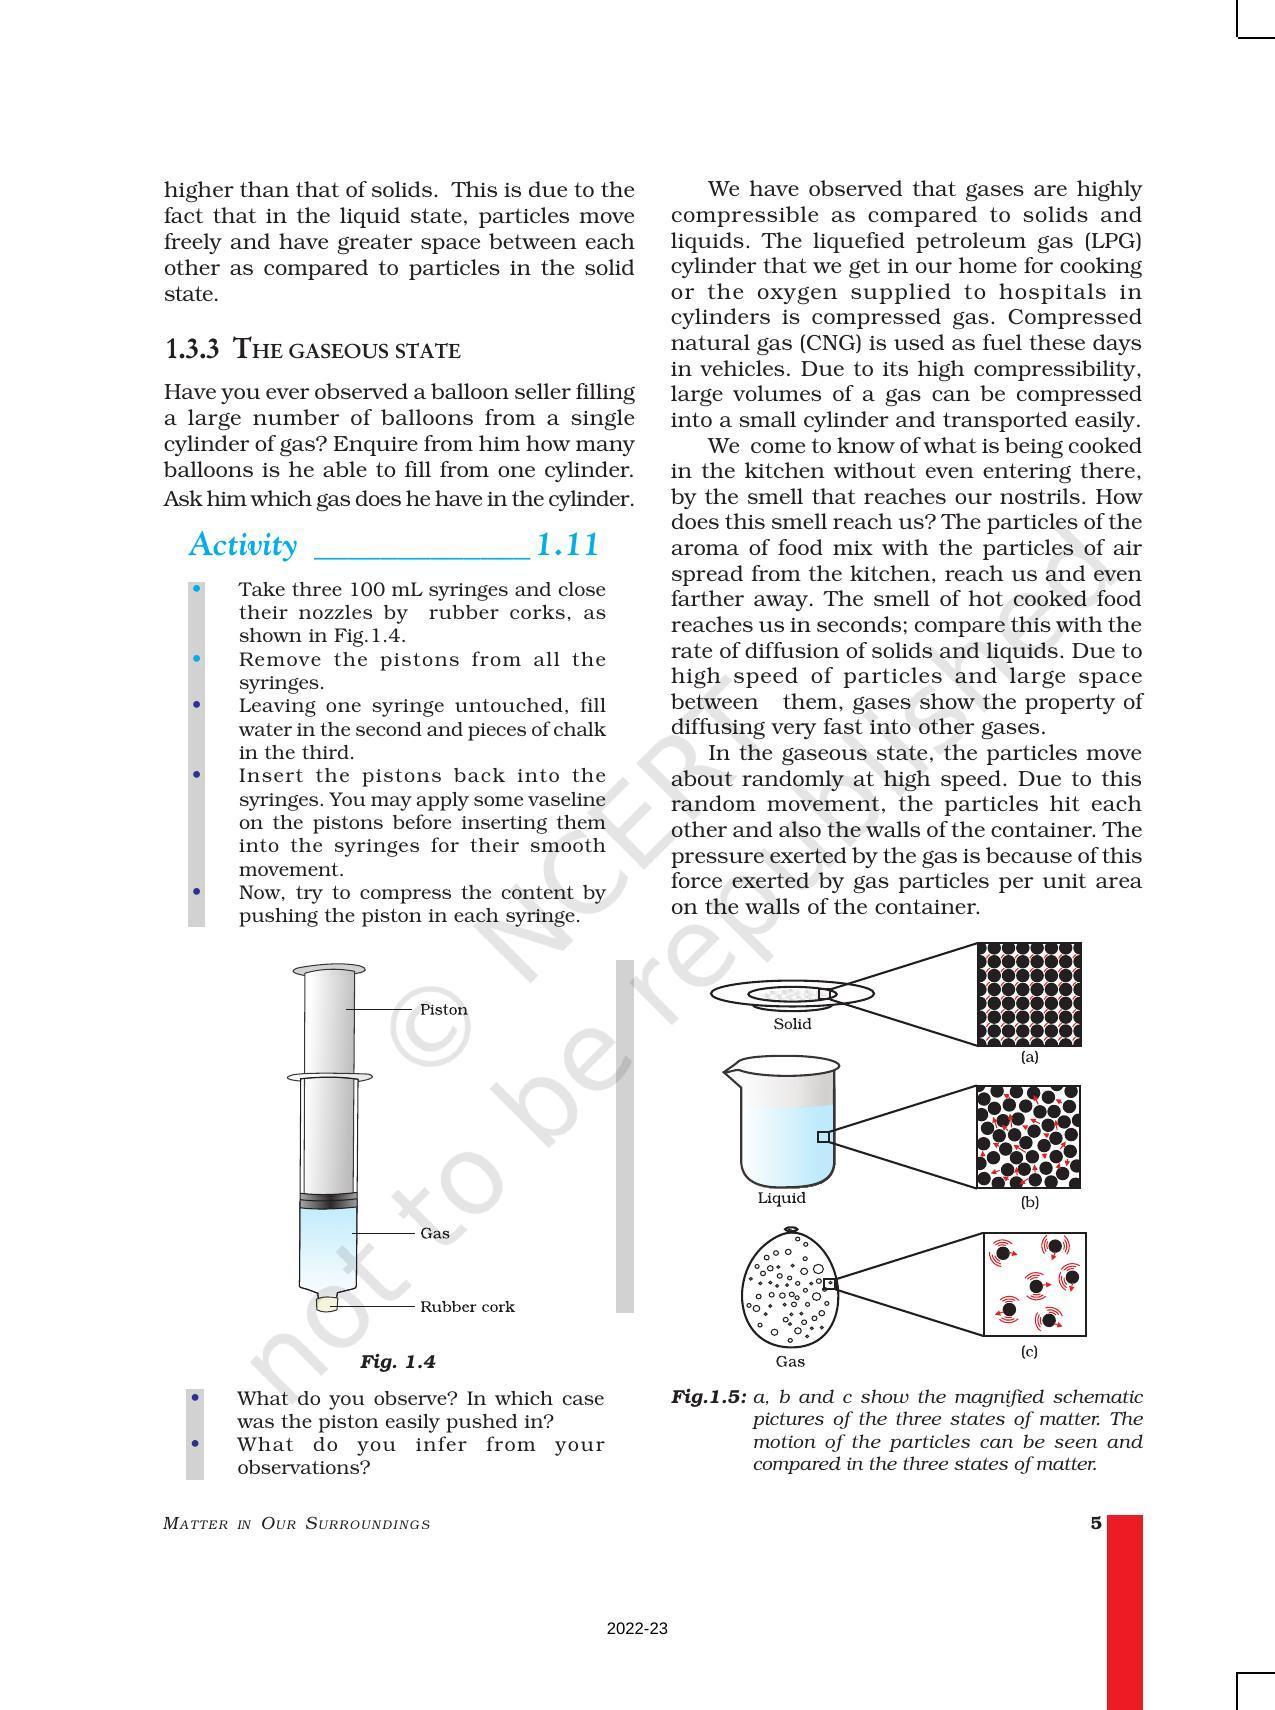 NCERT Book for Class 9 Science Chapter 1 Matter in Our Surroundings - Page 5